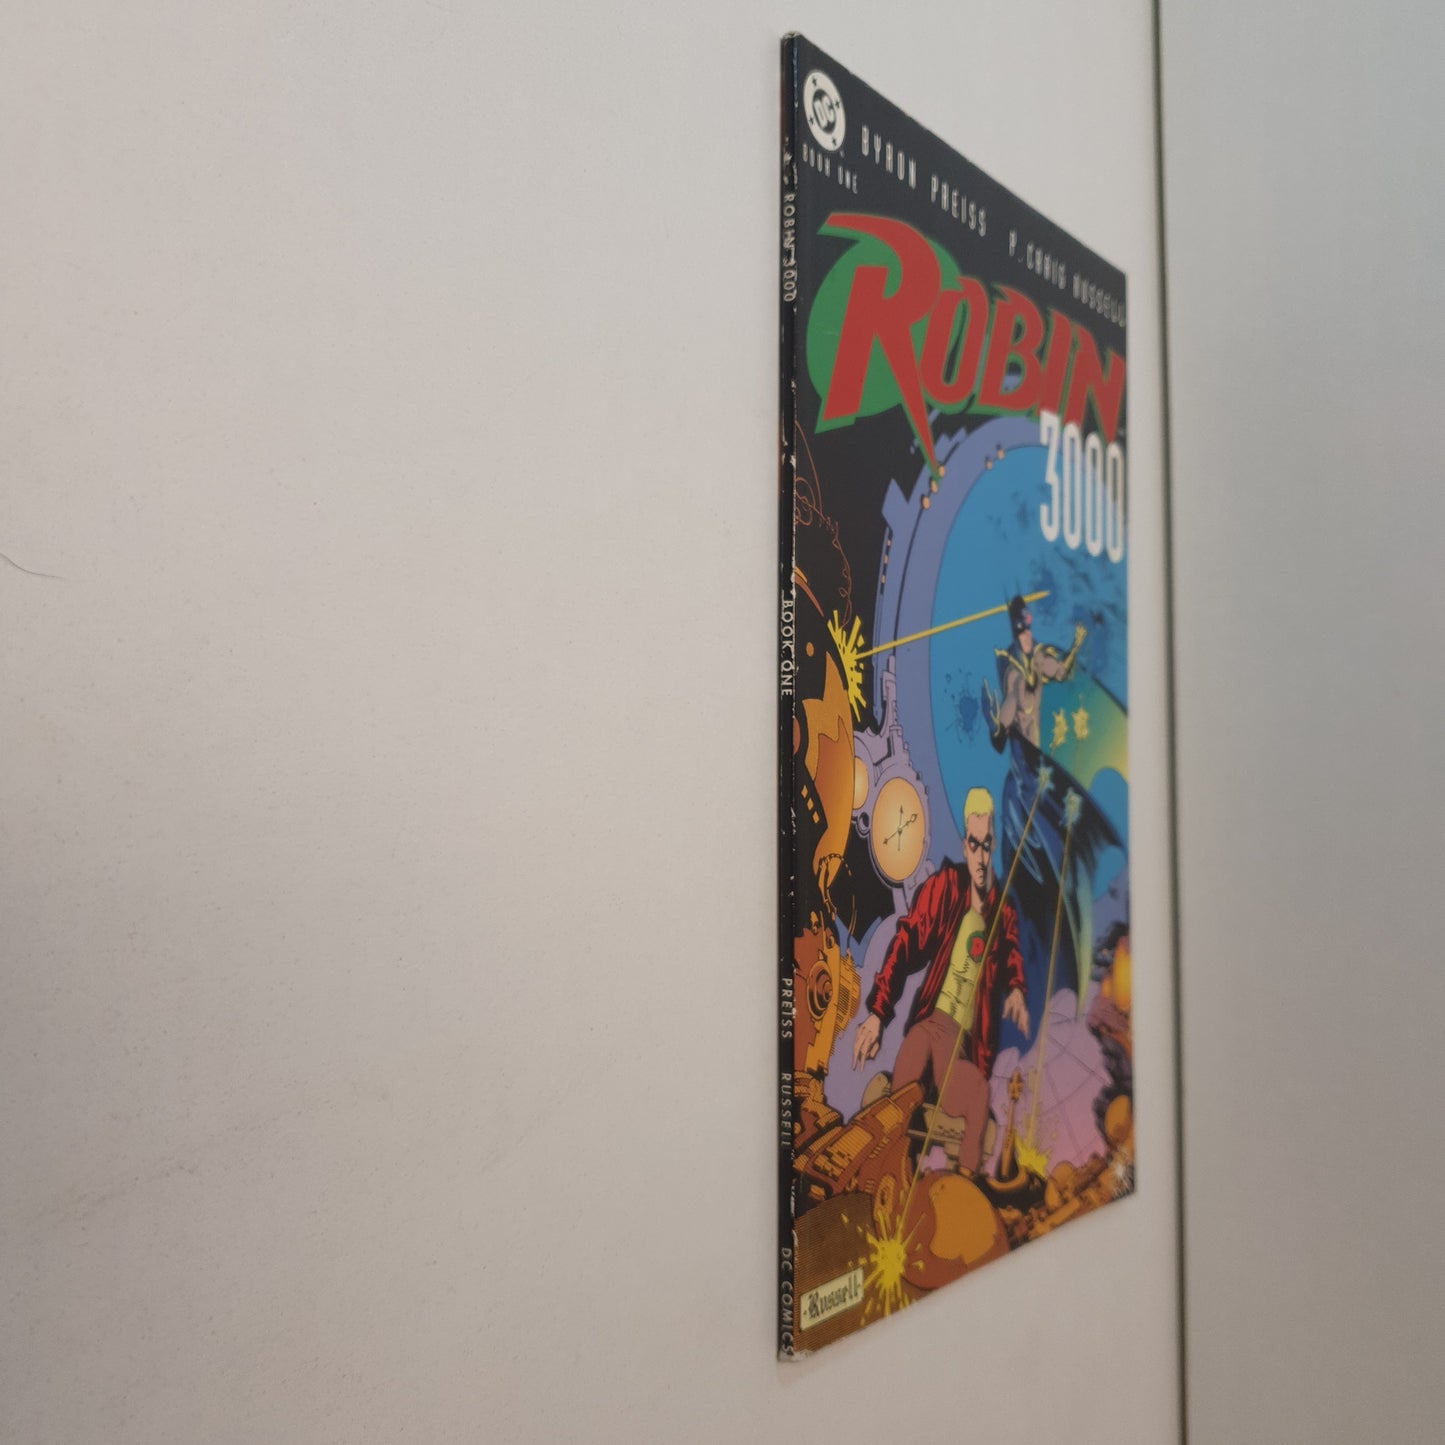 Robin 3000 Book One by Preiss & Russell (1992)